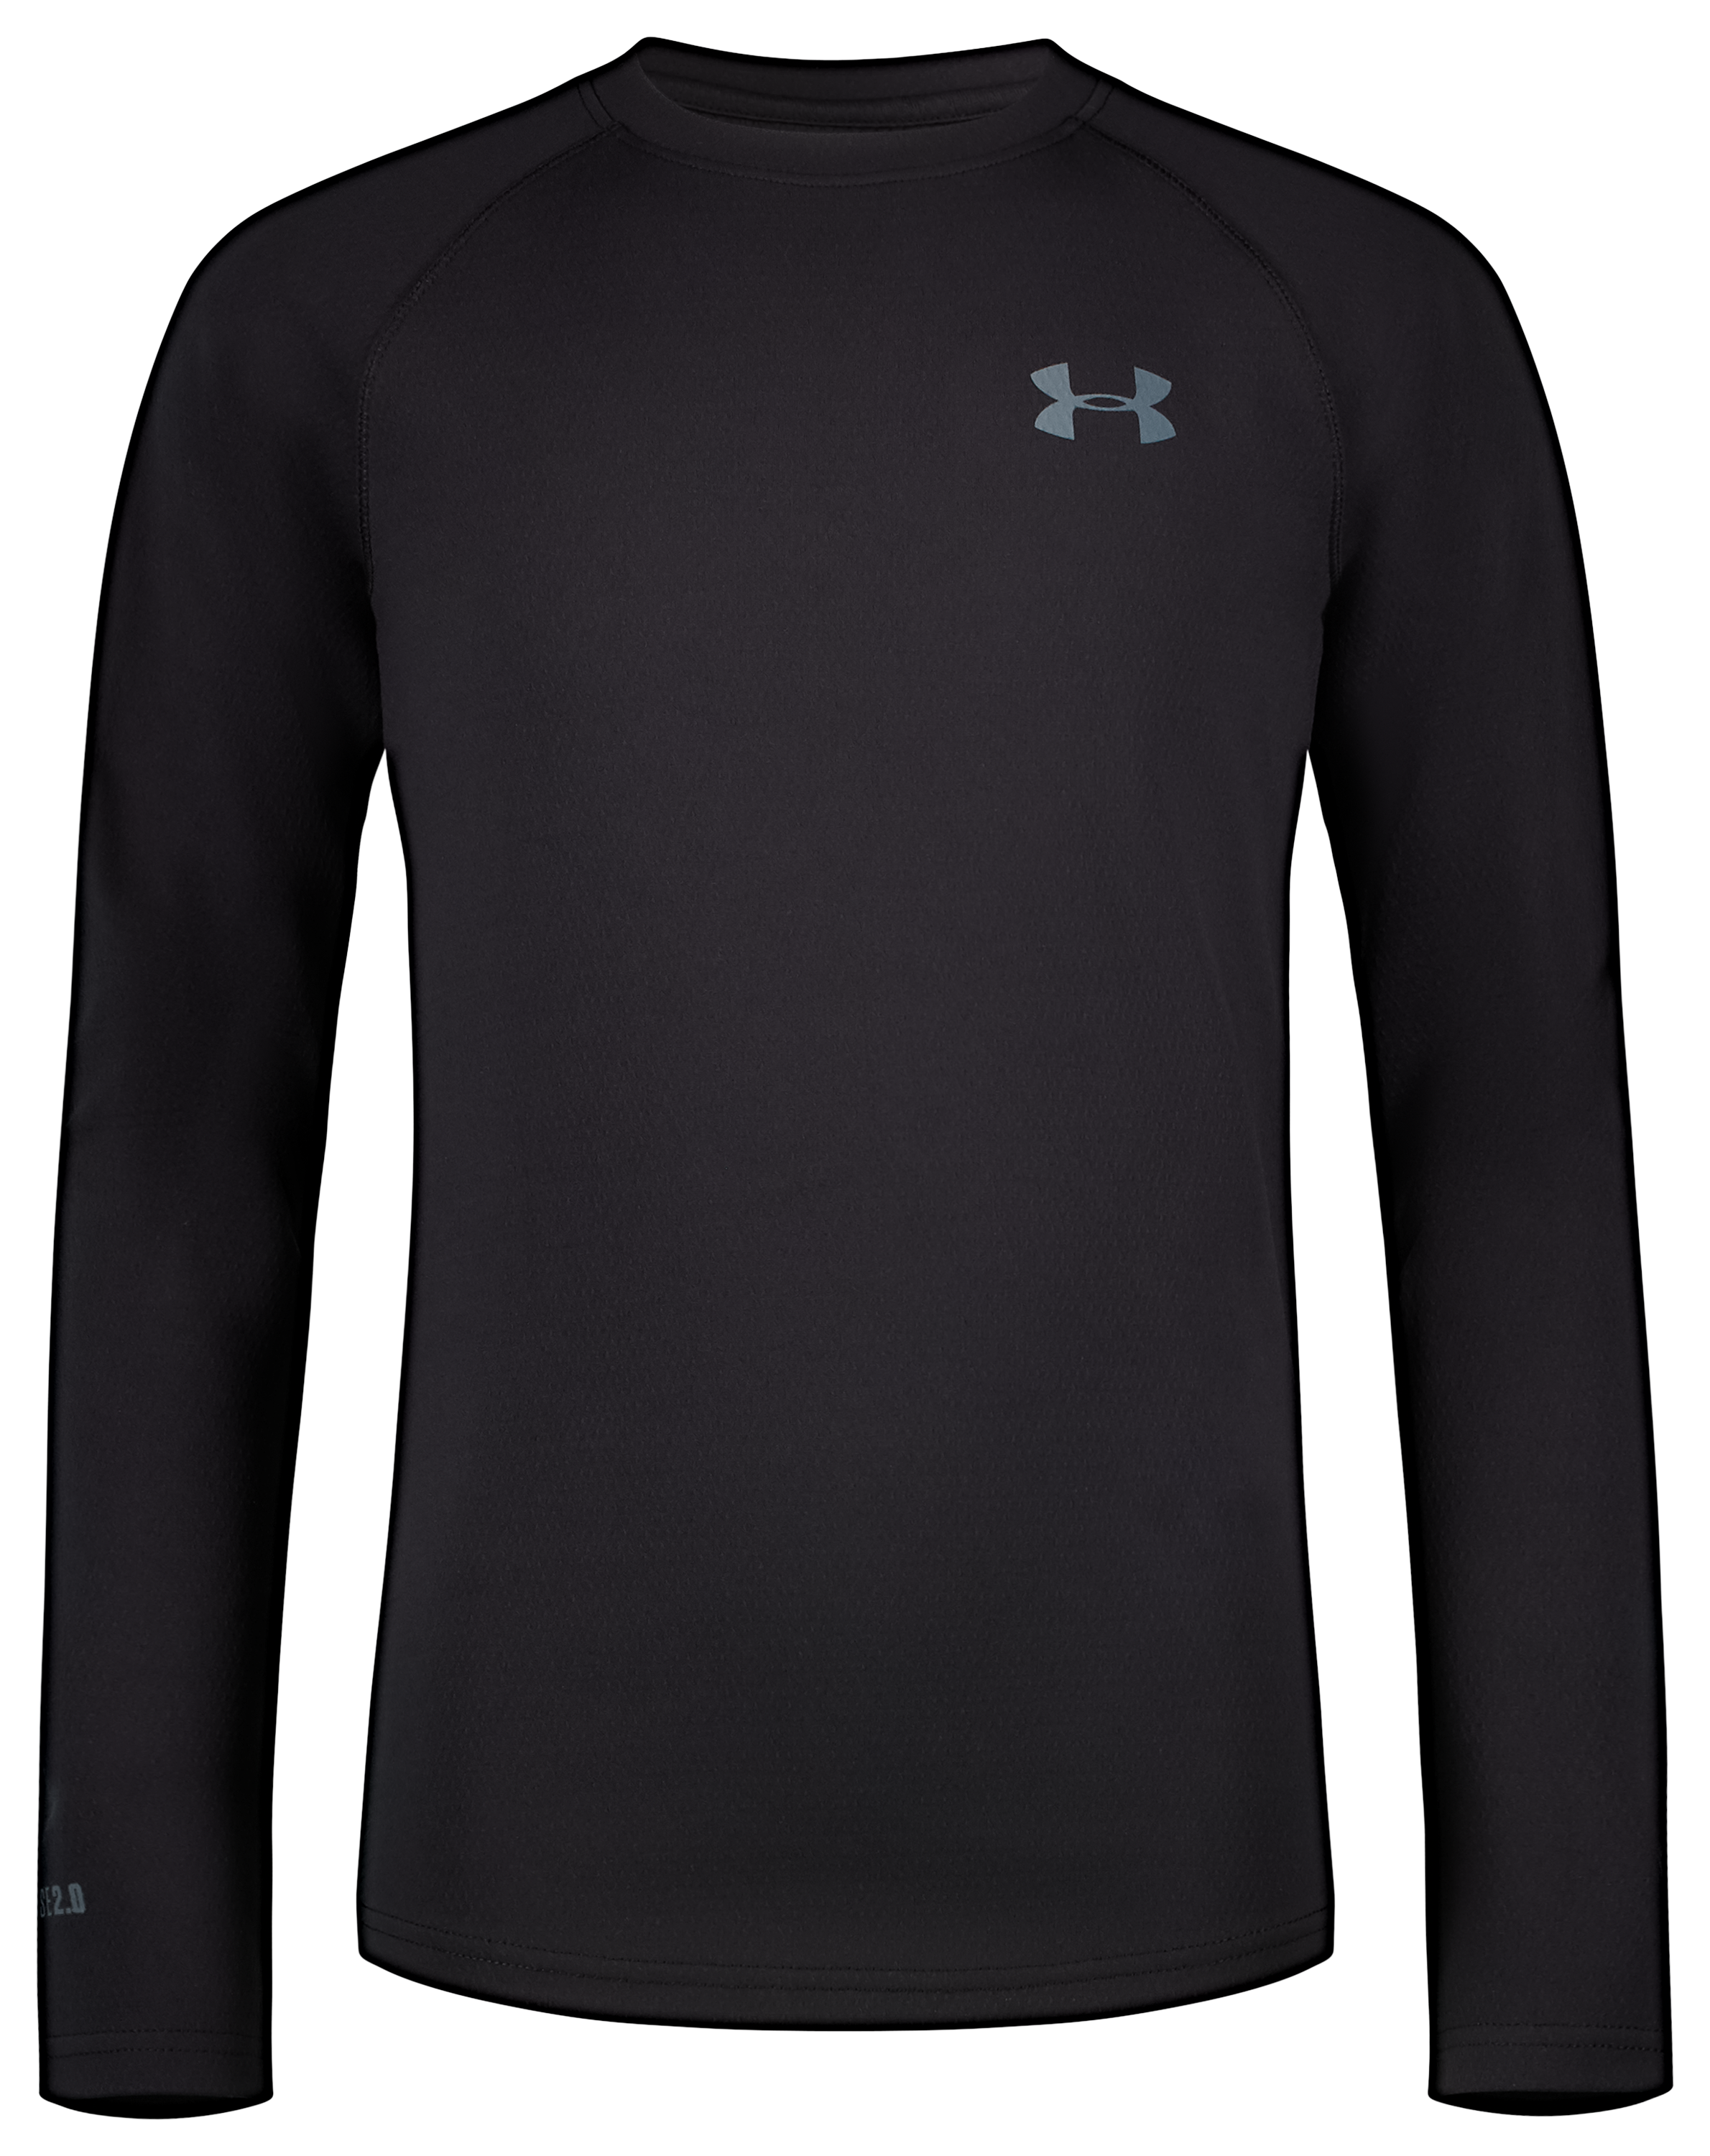 Under Armour Men's Midweight Baselayer 2.0 Hooded Top